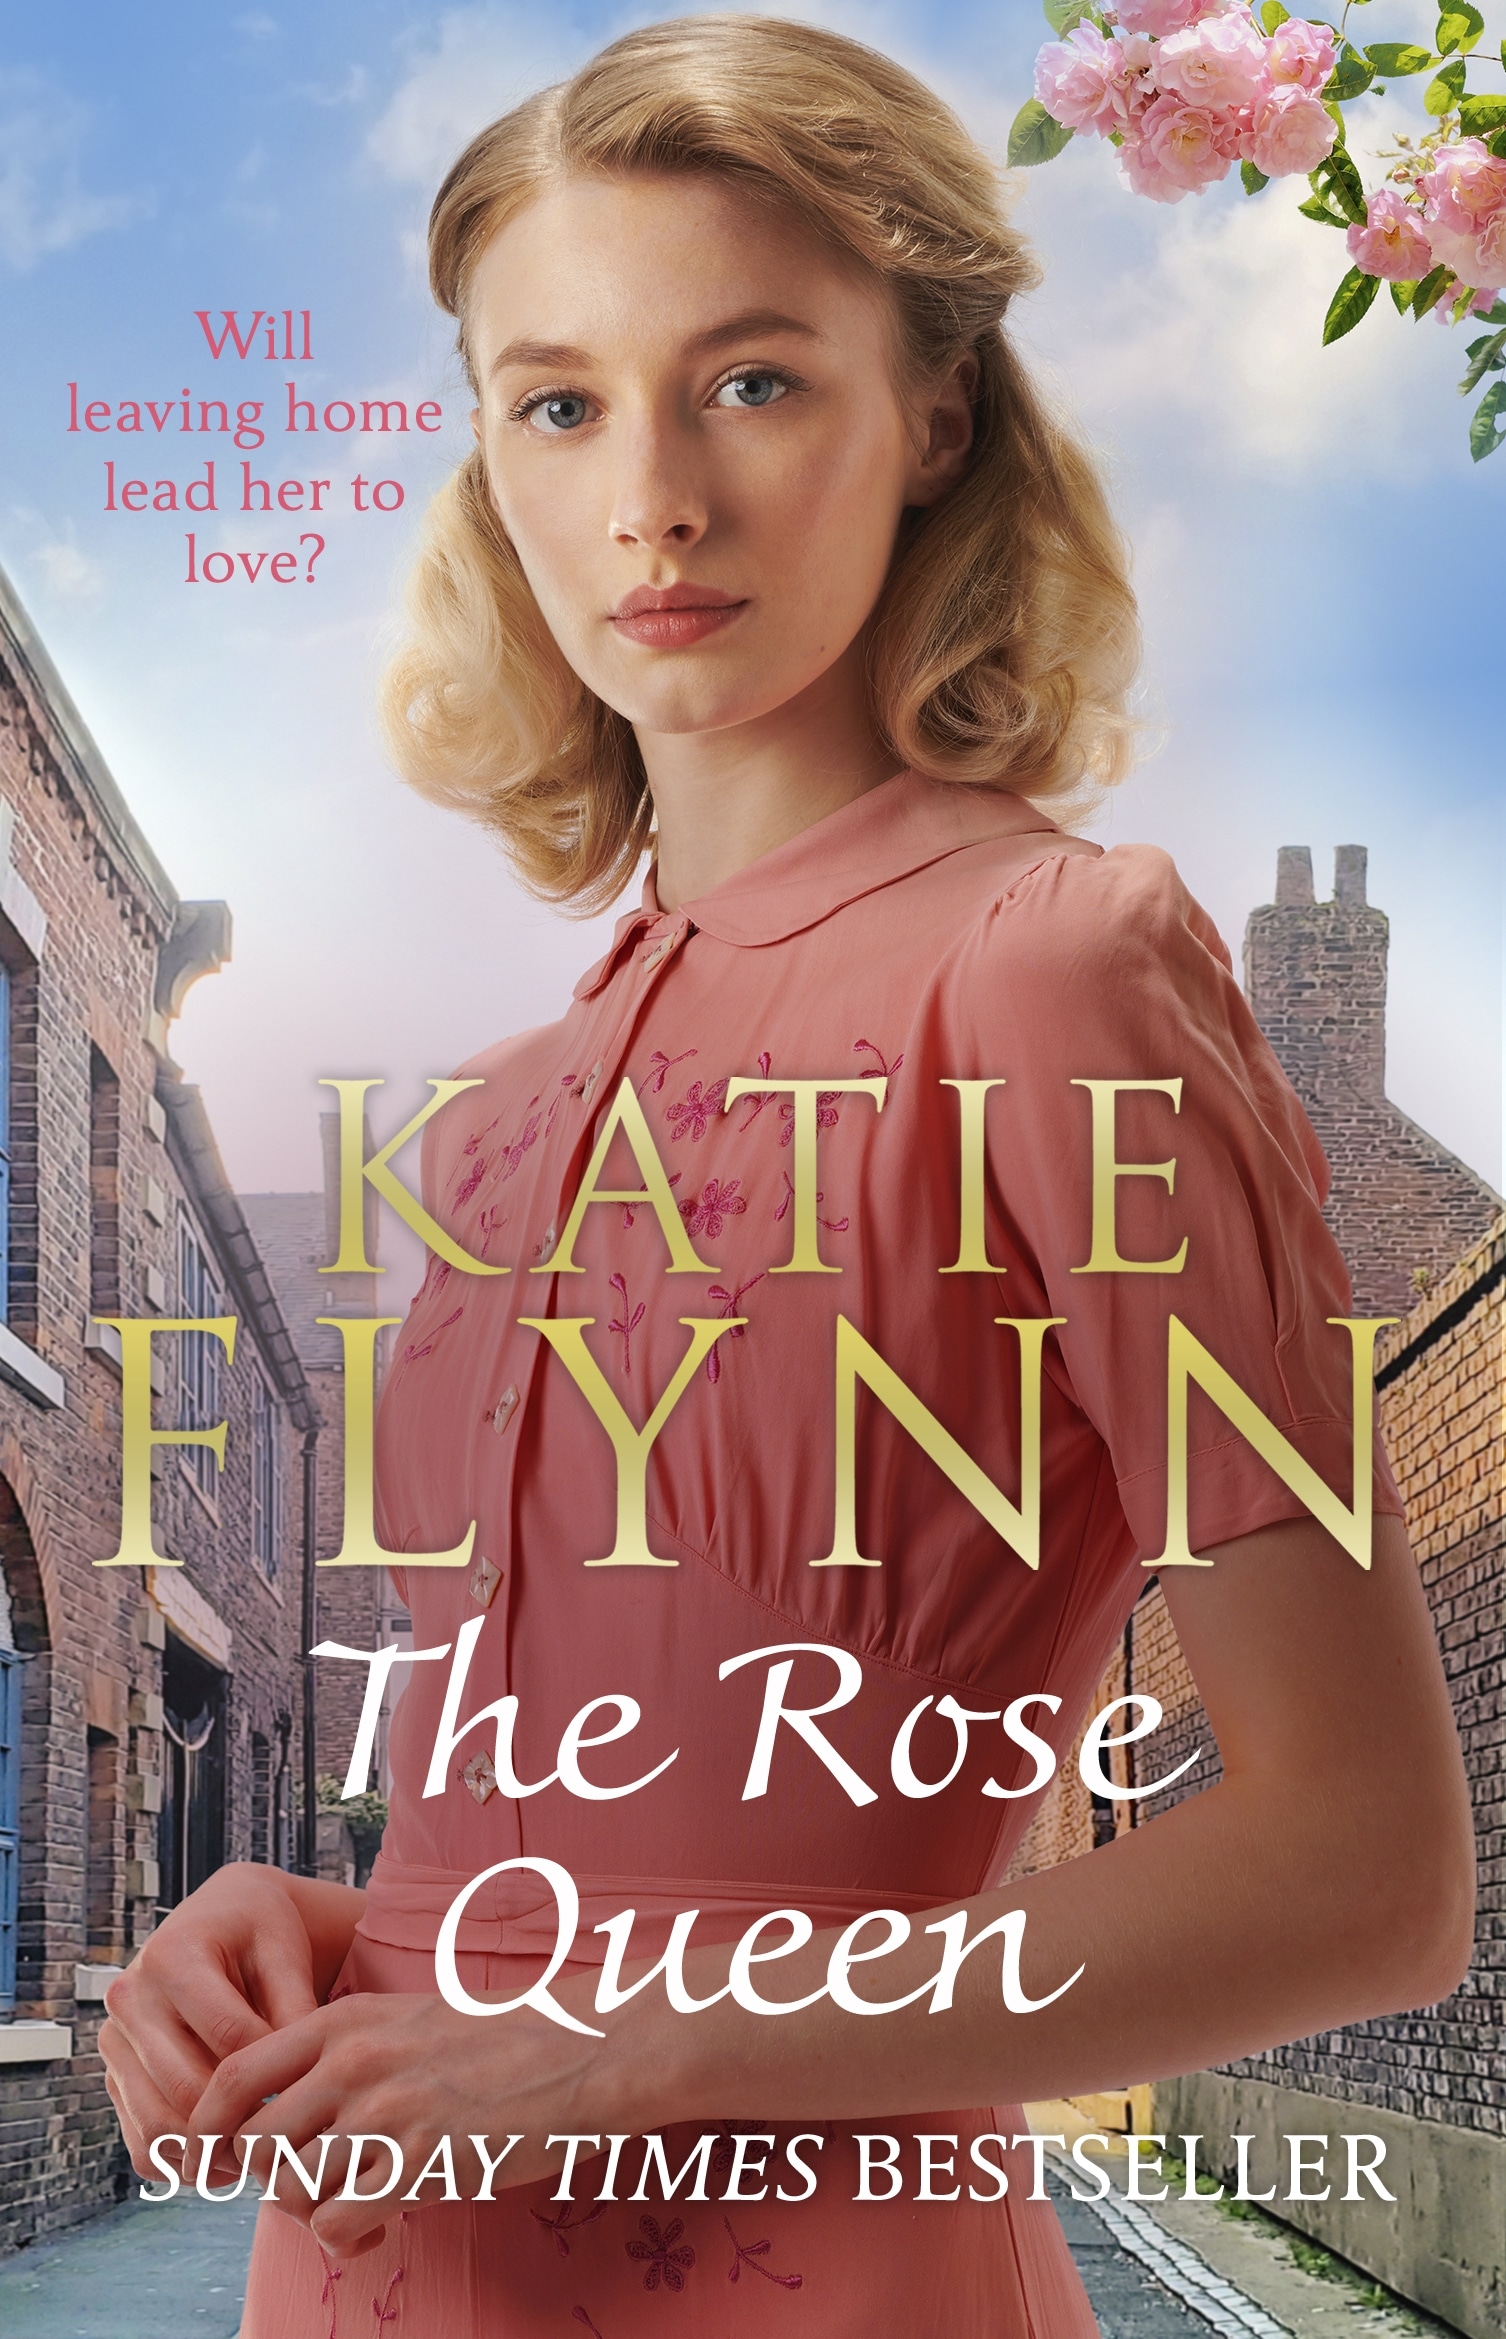 Book “The Rose Queen” by Katie Flynn — January 6, 2022